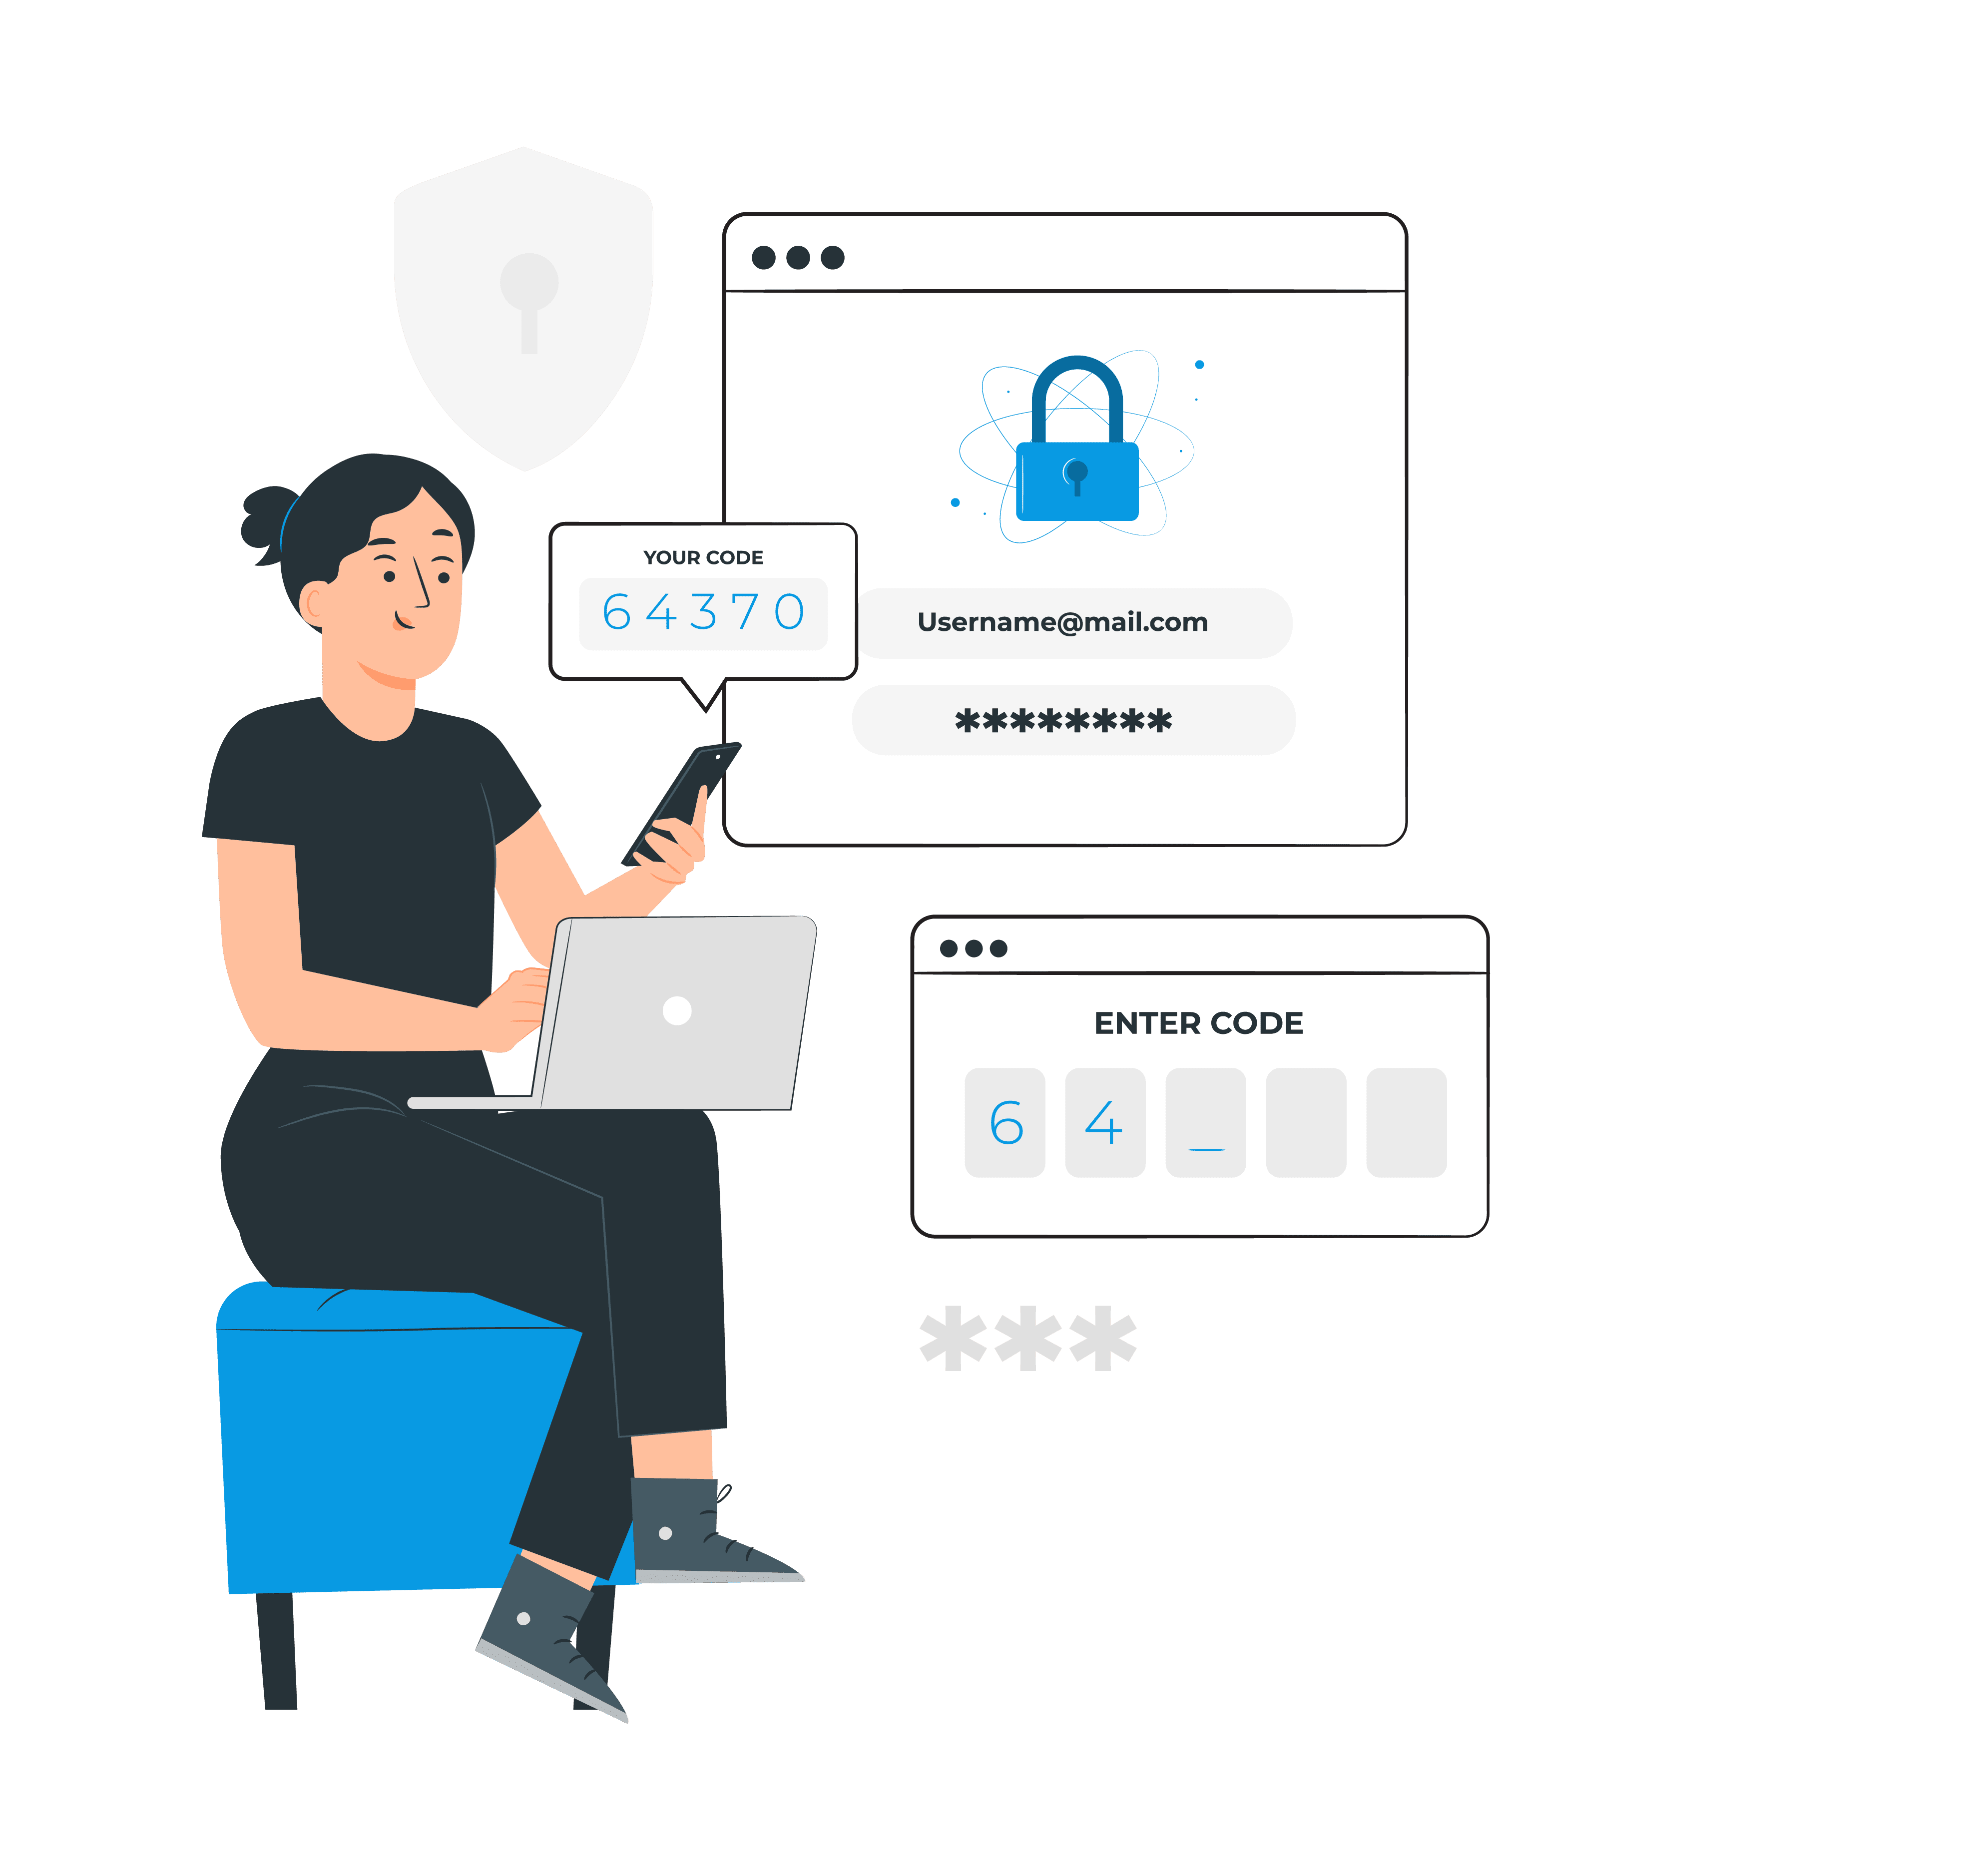 network and password security